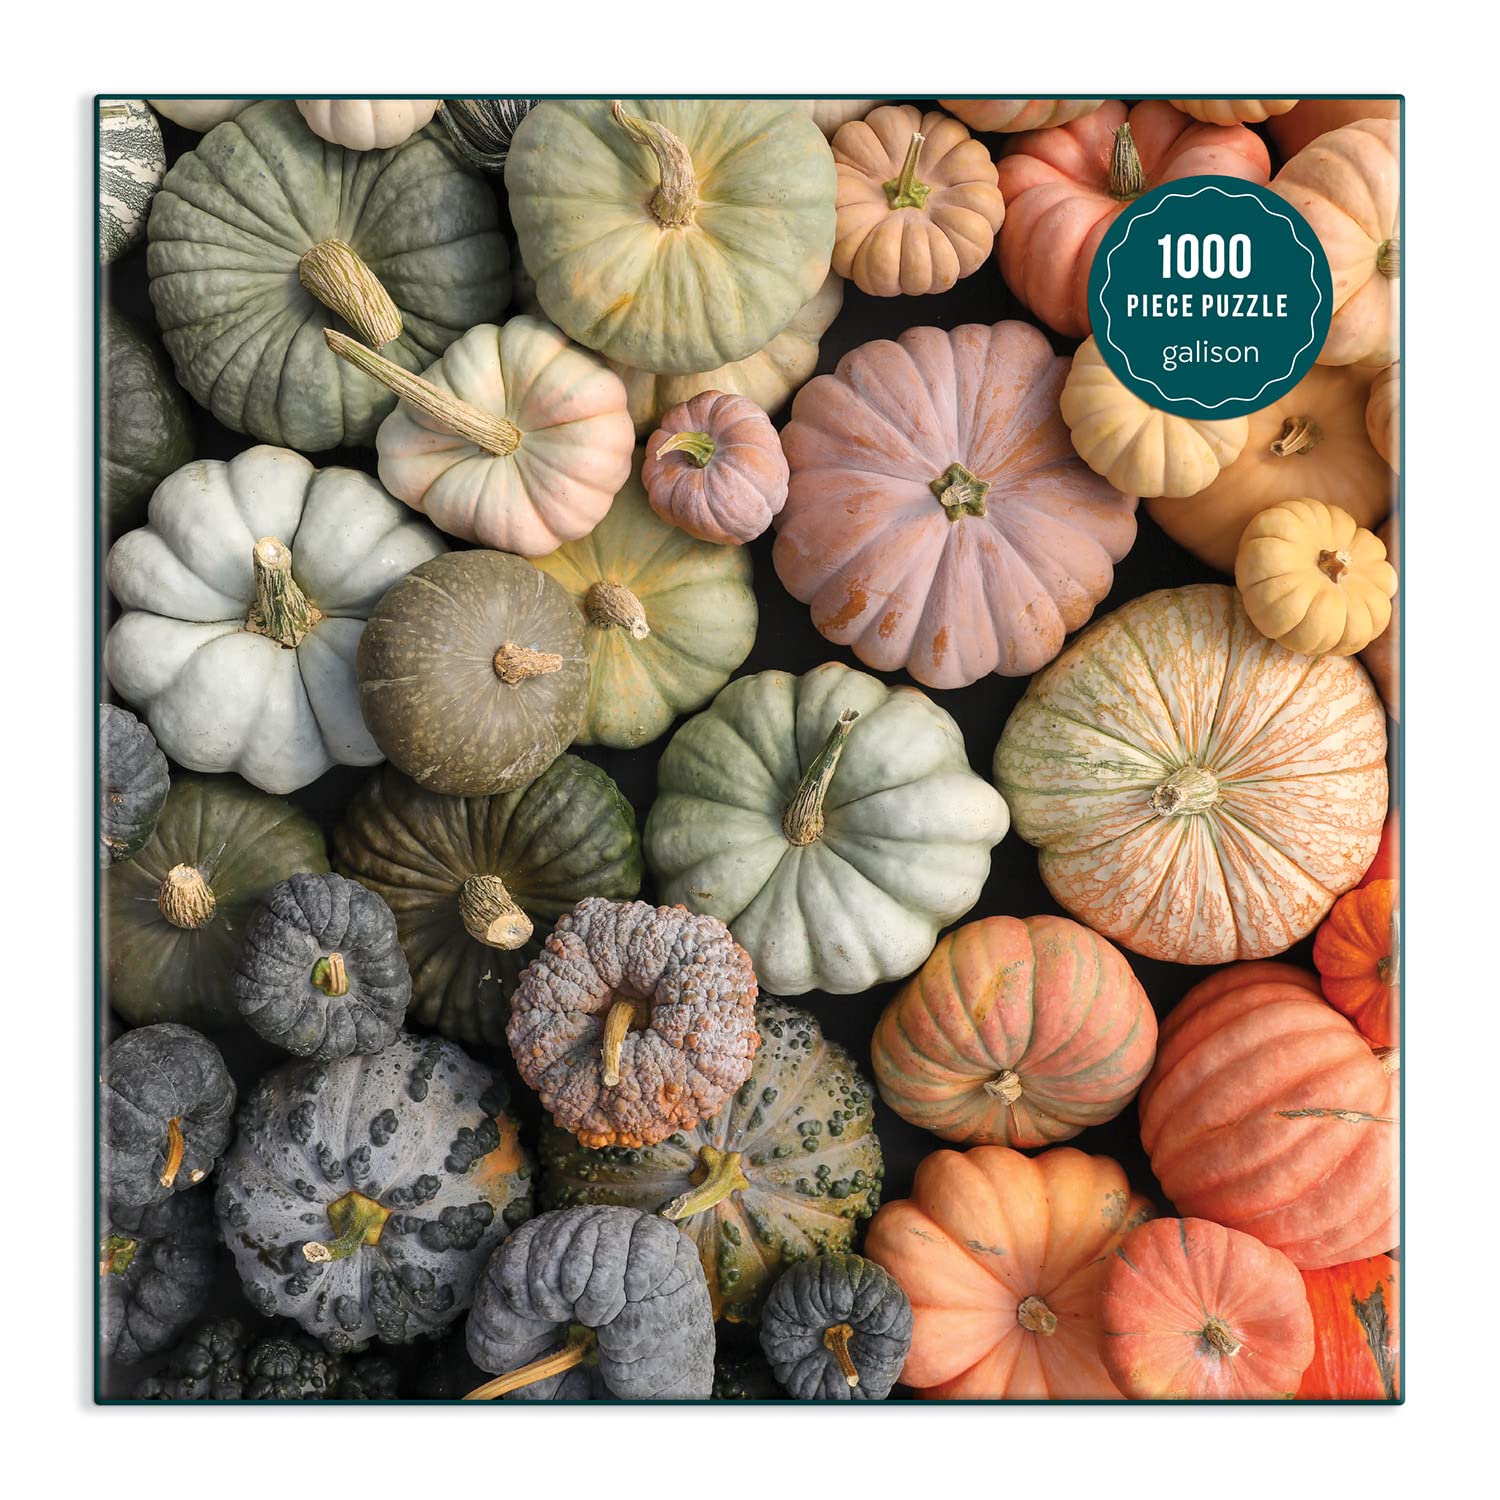 Galison Heirloom Pumpkins Puzzle, 1000 Pieces, 27” x 20” – Difficult Jigsaw Puzzle Featuring Stunning and Colorful Artwork – Thick, Sturdy Pieces, Challenging Family Activity